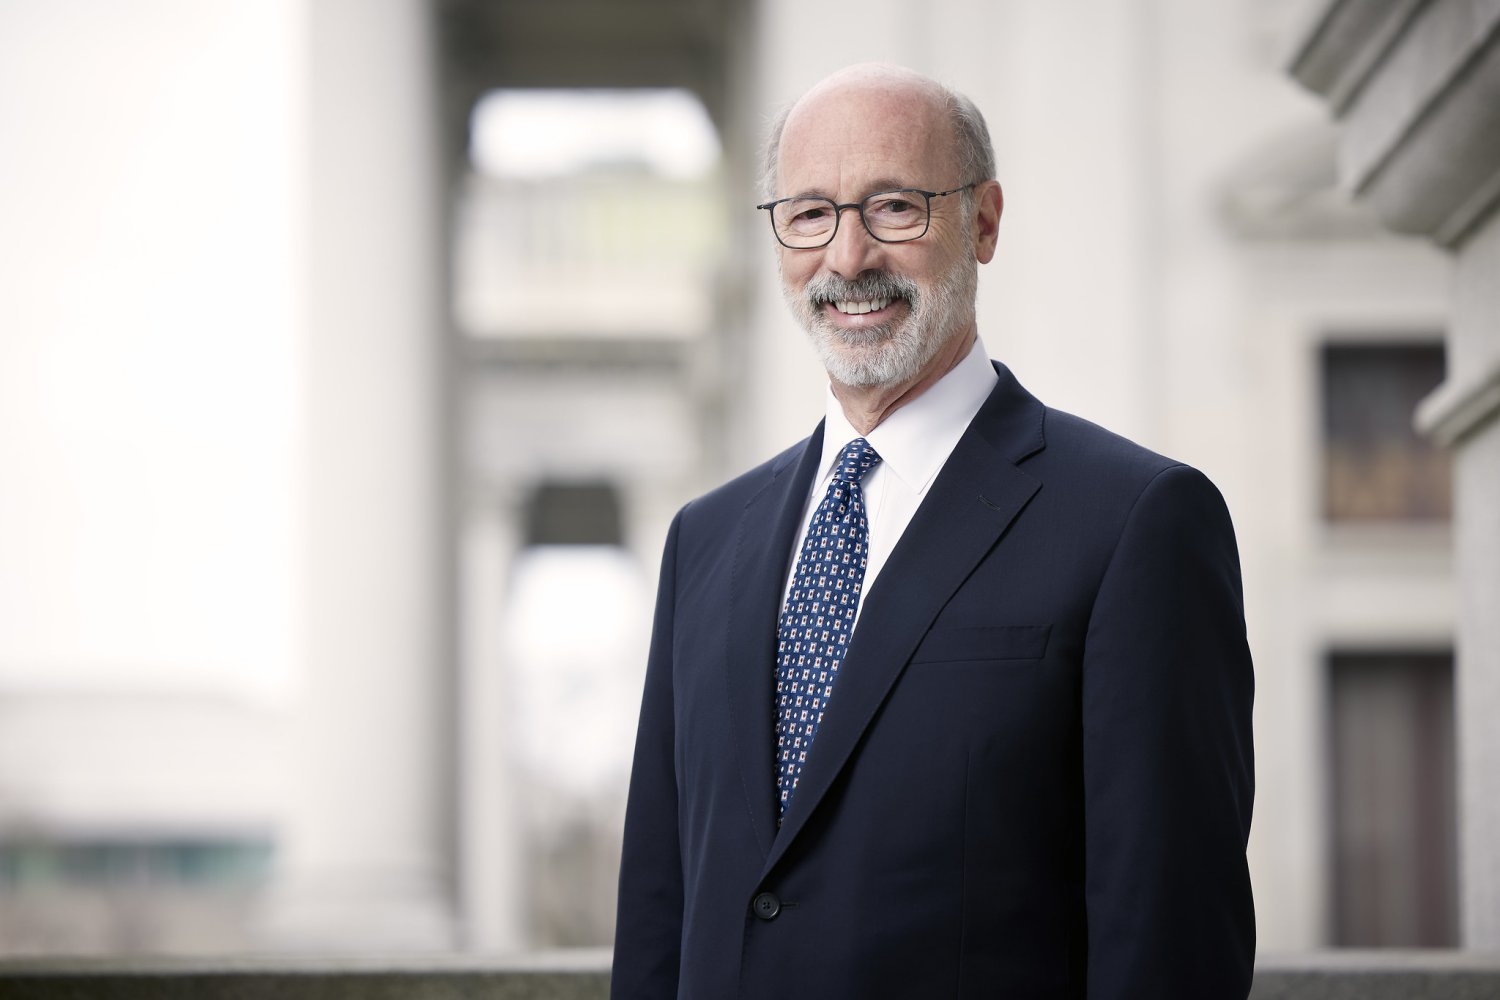 The 2023 Robert A. Muh Alumni Award recognizes Tom Wolf’s distinguished political career. Wolf, a 1981 graduate of MIT’s PhD program in the Department of Political Science, served two terms as governor of Pennsylvania.